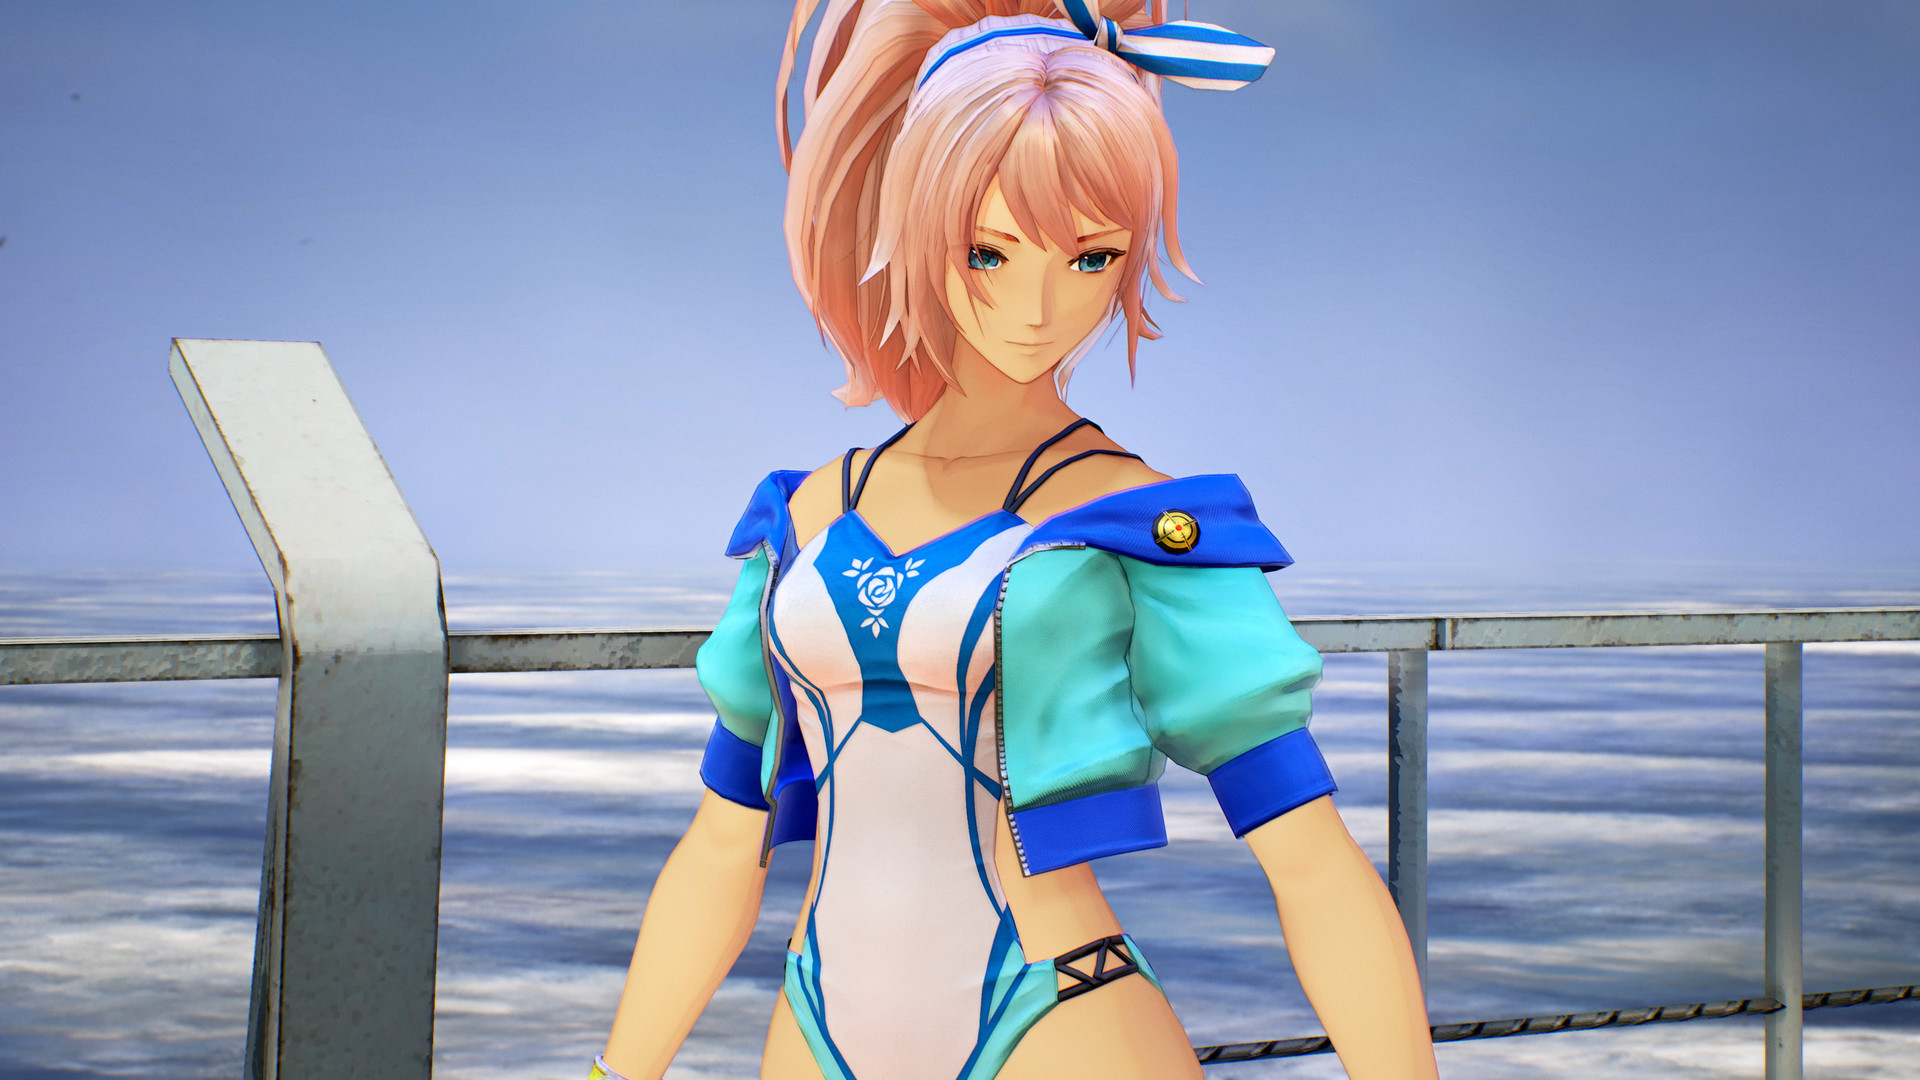 A new Tales of Arise Shion figure is on the way, and it looks like she's wearing her swimsuit from the Beach Time Triple Pack DLC.